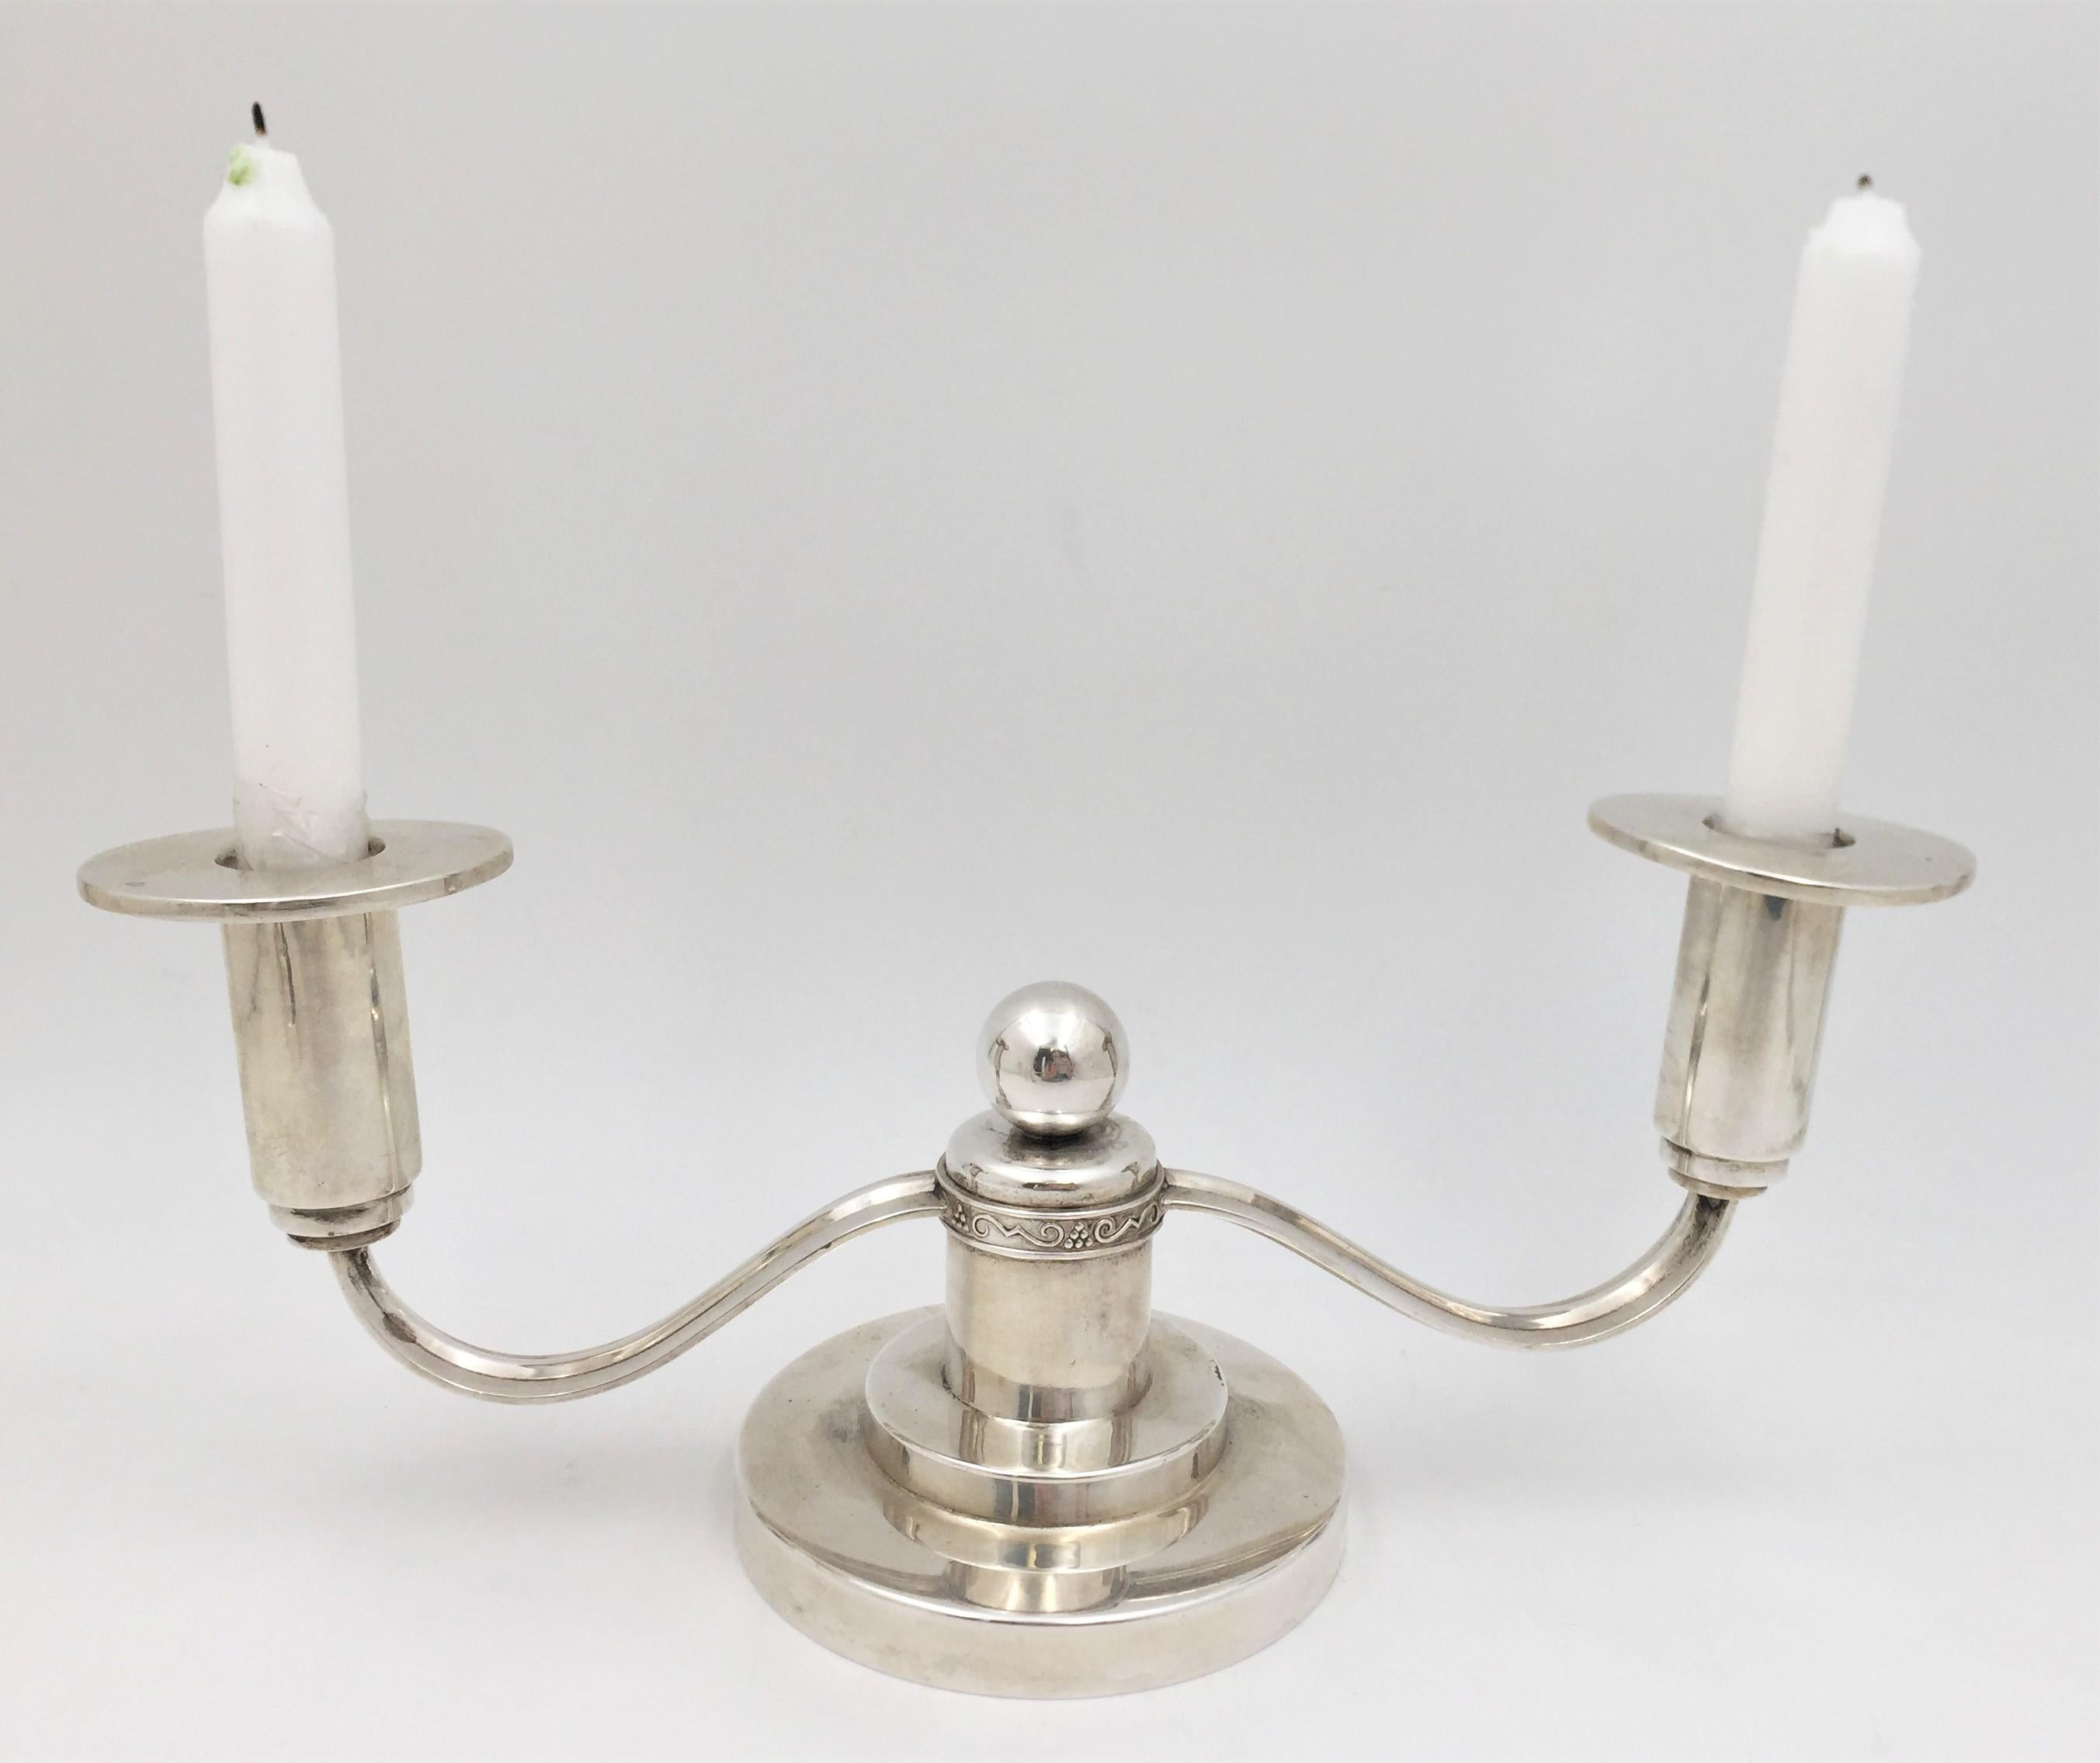 N.M. Thune, Norwegian 0.830 silver pair of 2-light candelabra in Mid-Century Modern style reminiscent of the work of the great silversmith Georg Jensen. With its elegant proportions and curvilinear designs, including a frieze of stylized motifs at